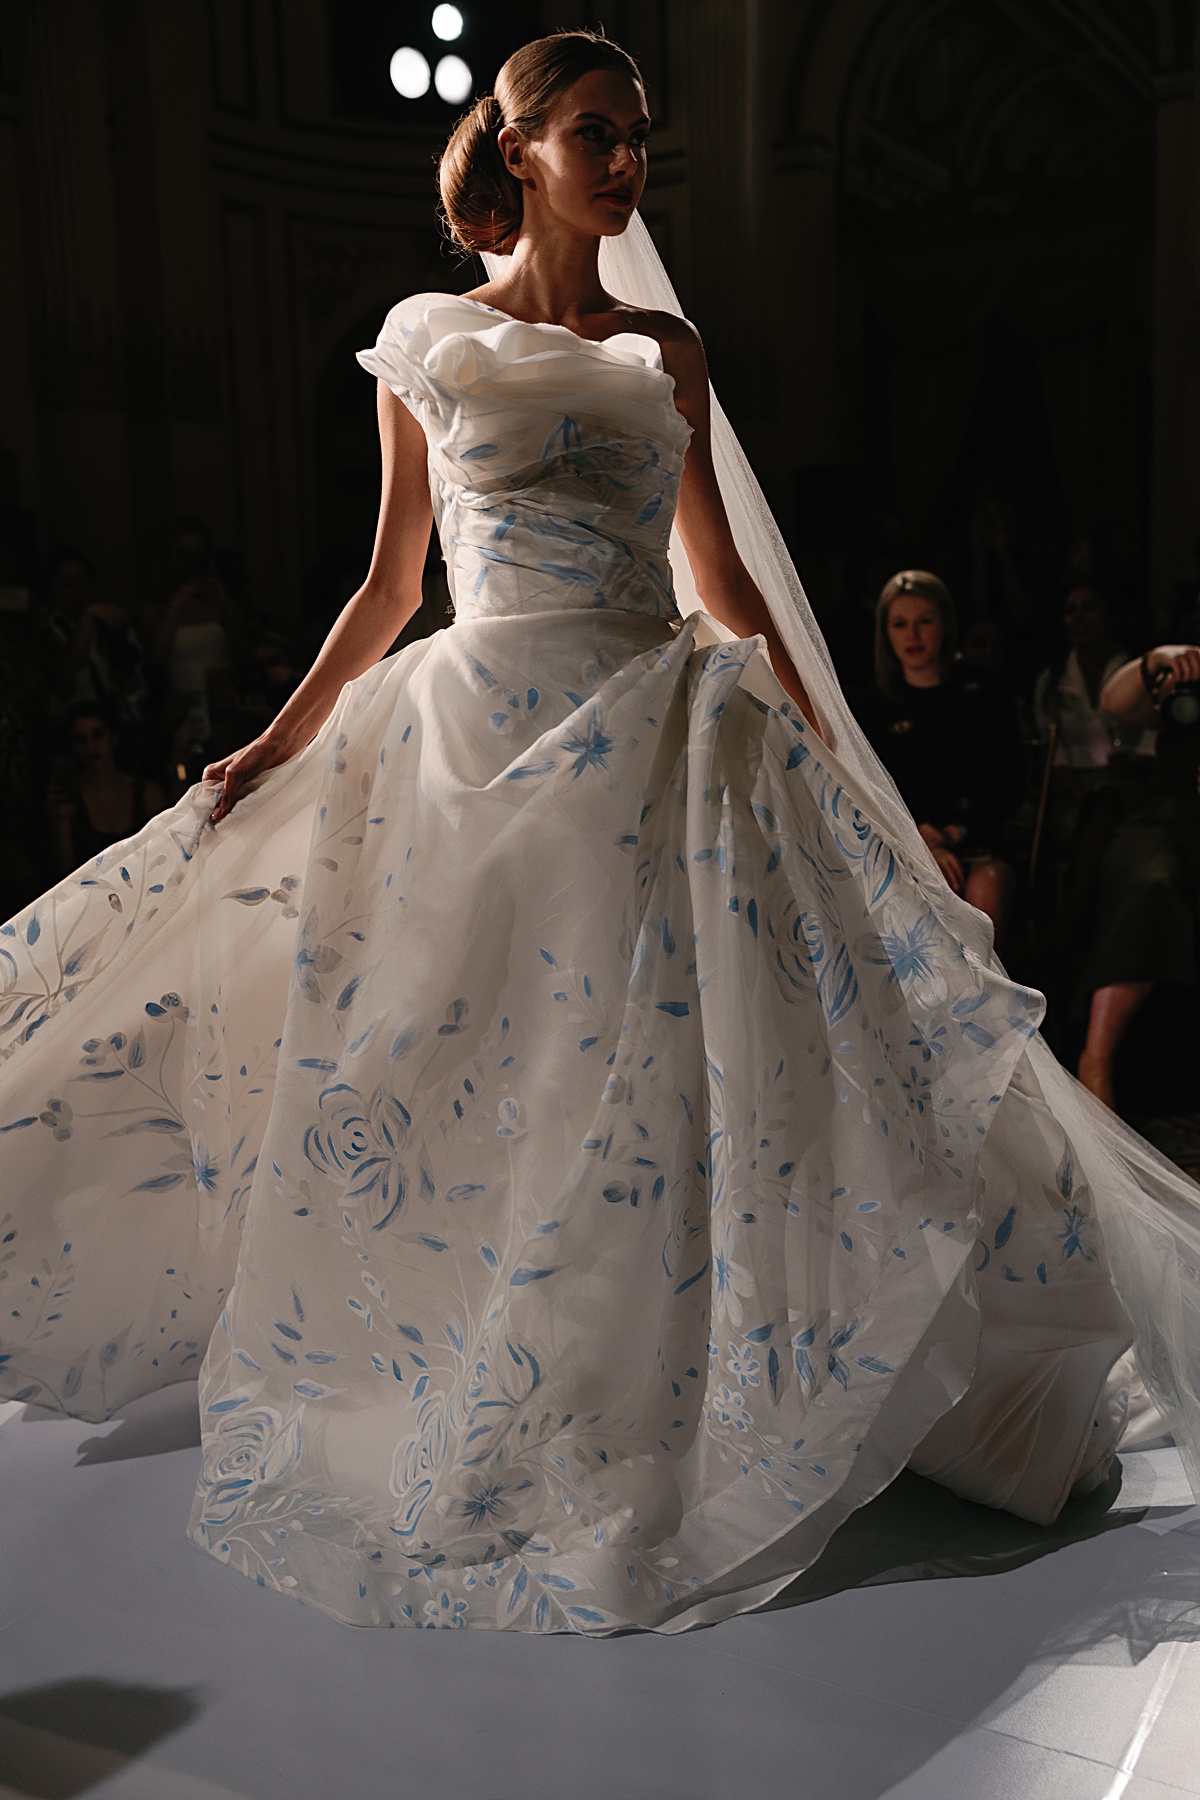 6 Trends from New York Bridal Fashion Week to Watch